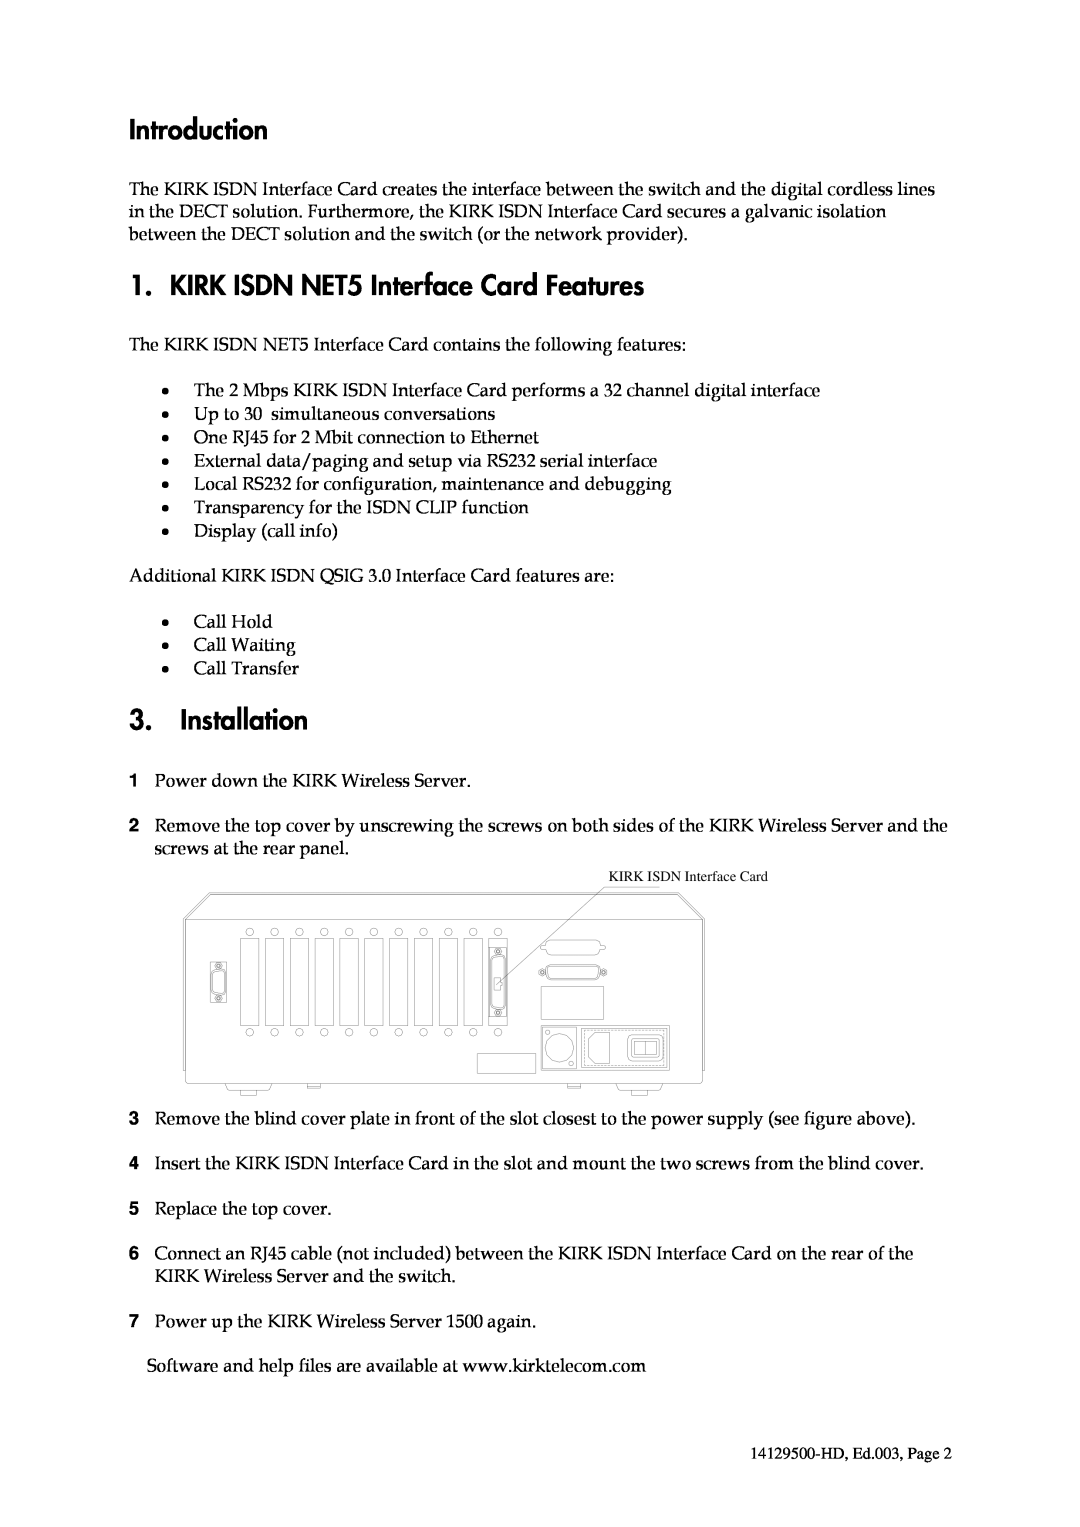 Polycom manual Introduction, KIRK ISDN NET5 Interface Card Features, Installation 